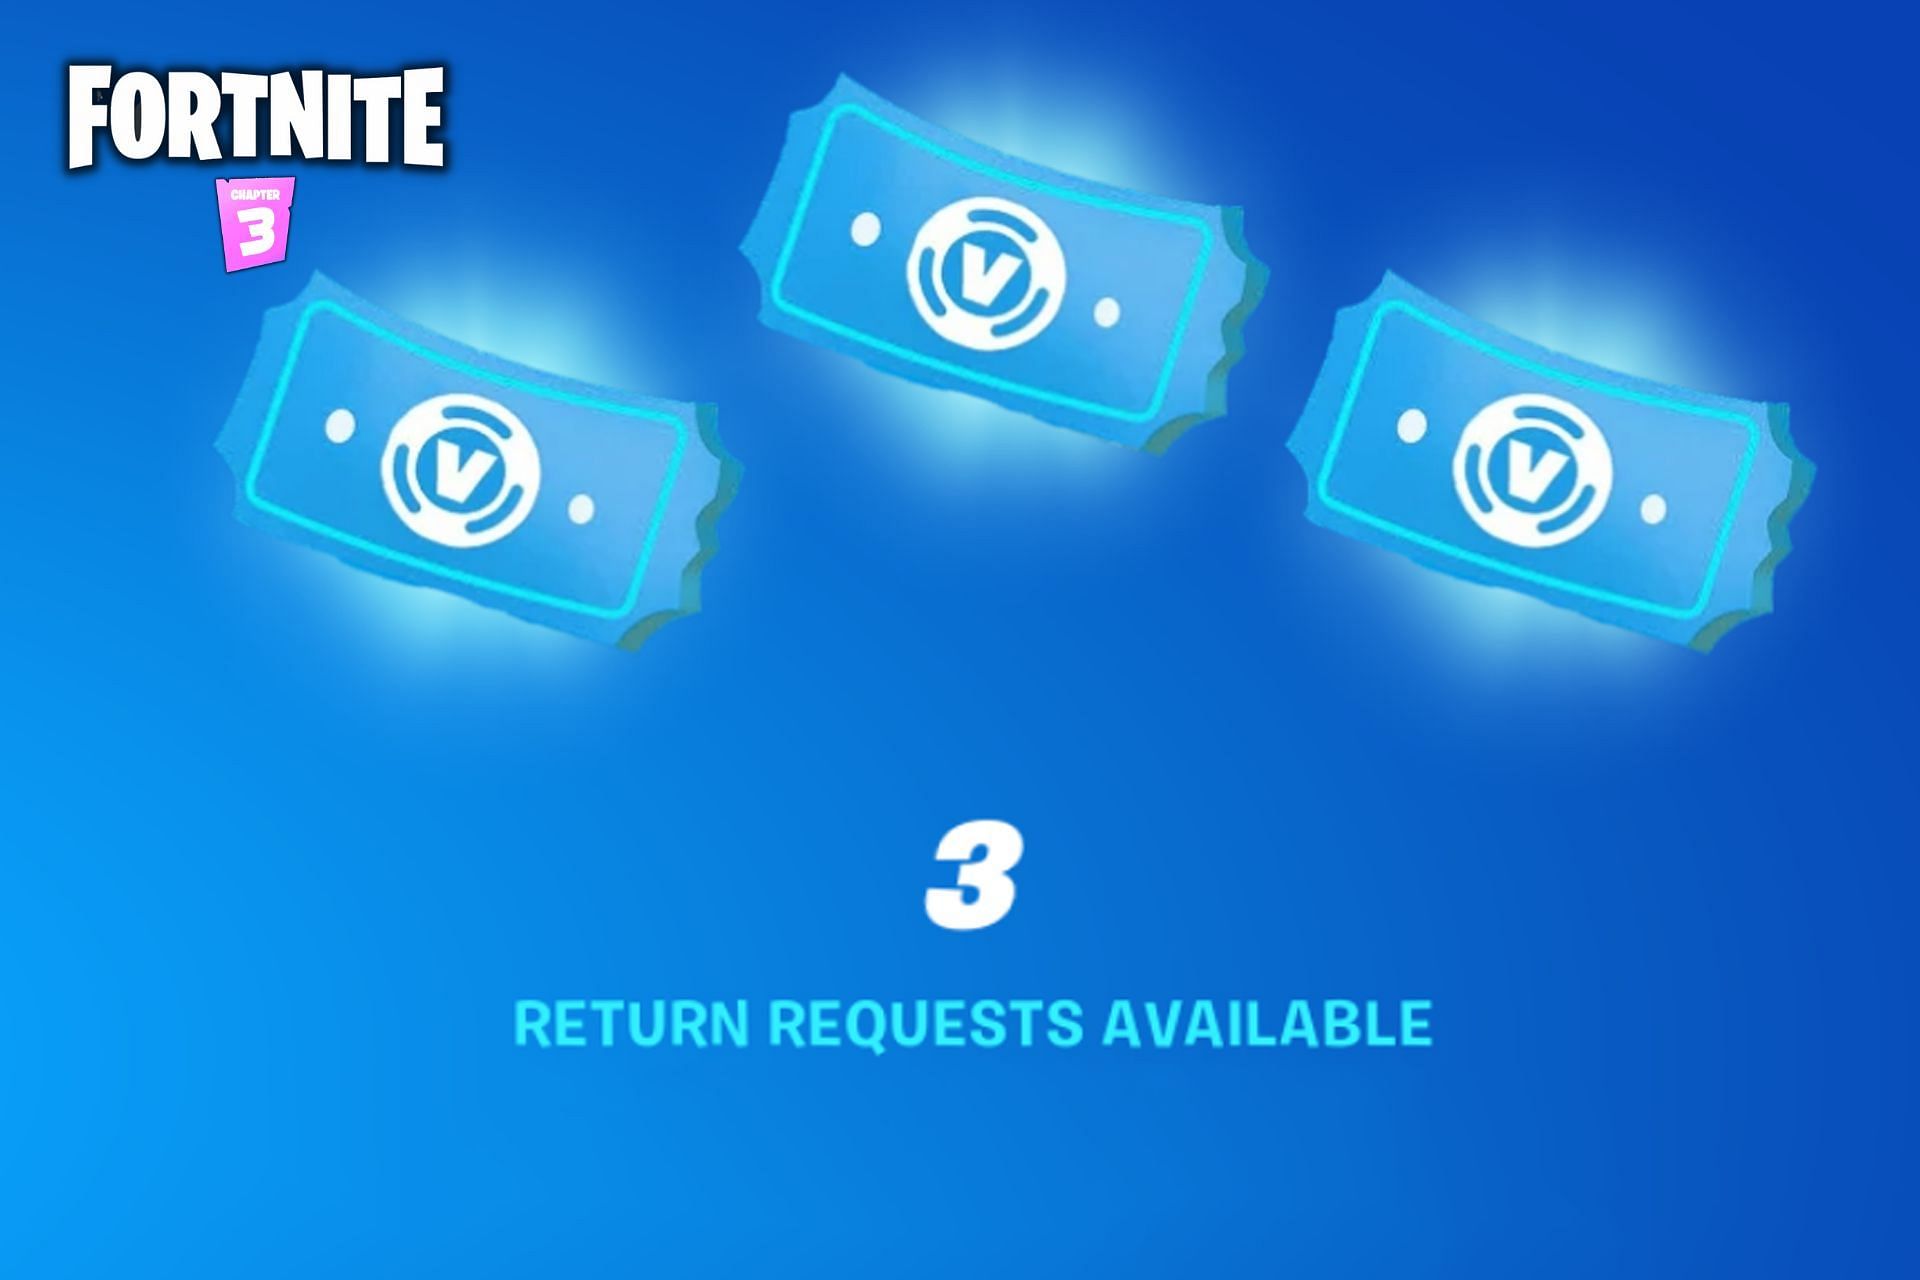 how-to-get-more-refund-tickets-the-right-way-in-fortnite-chapter-3-season-1